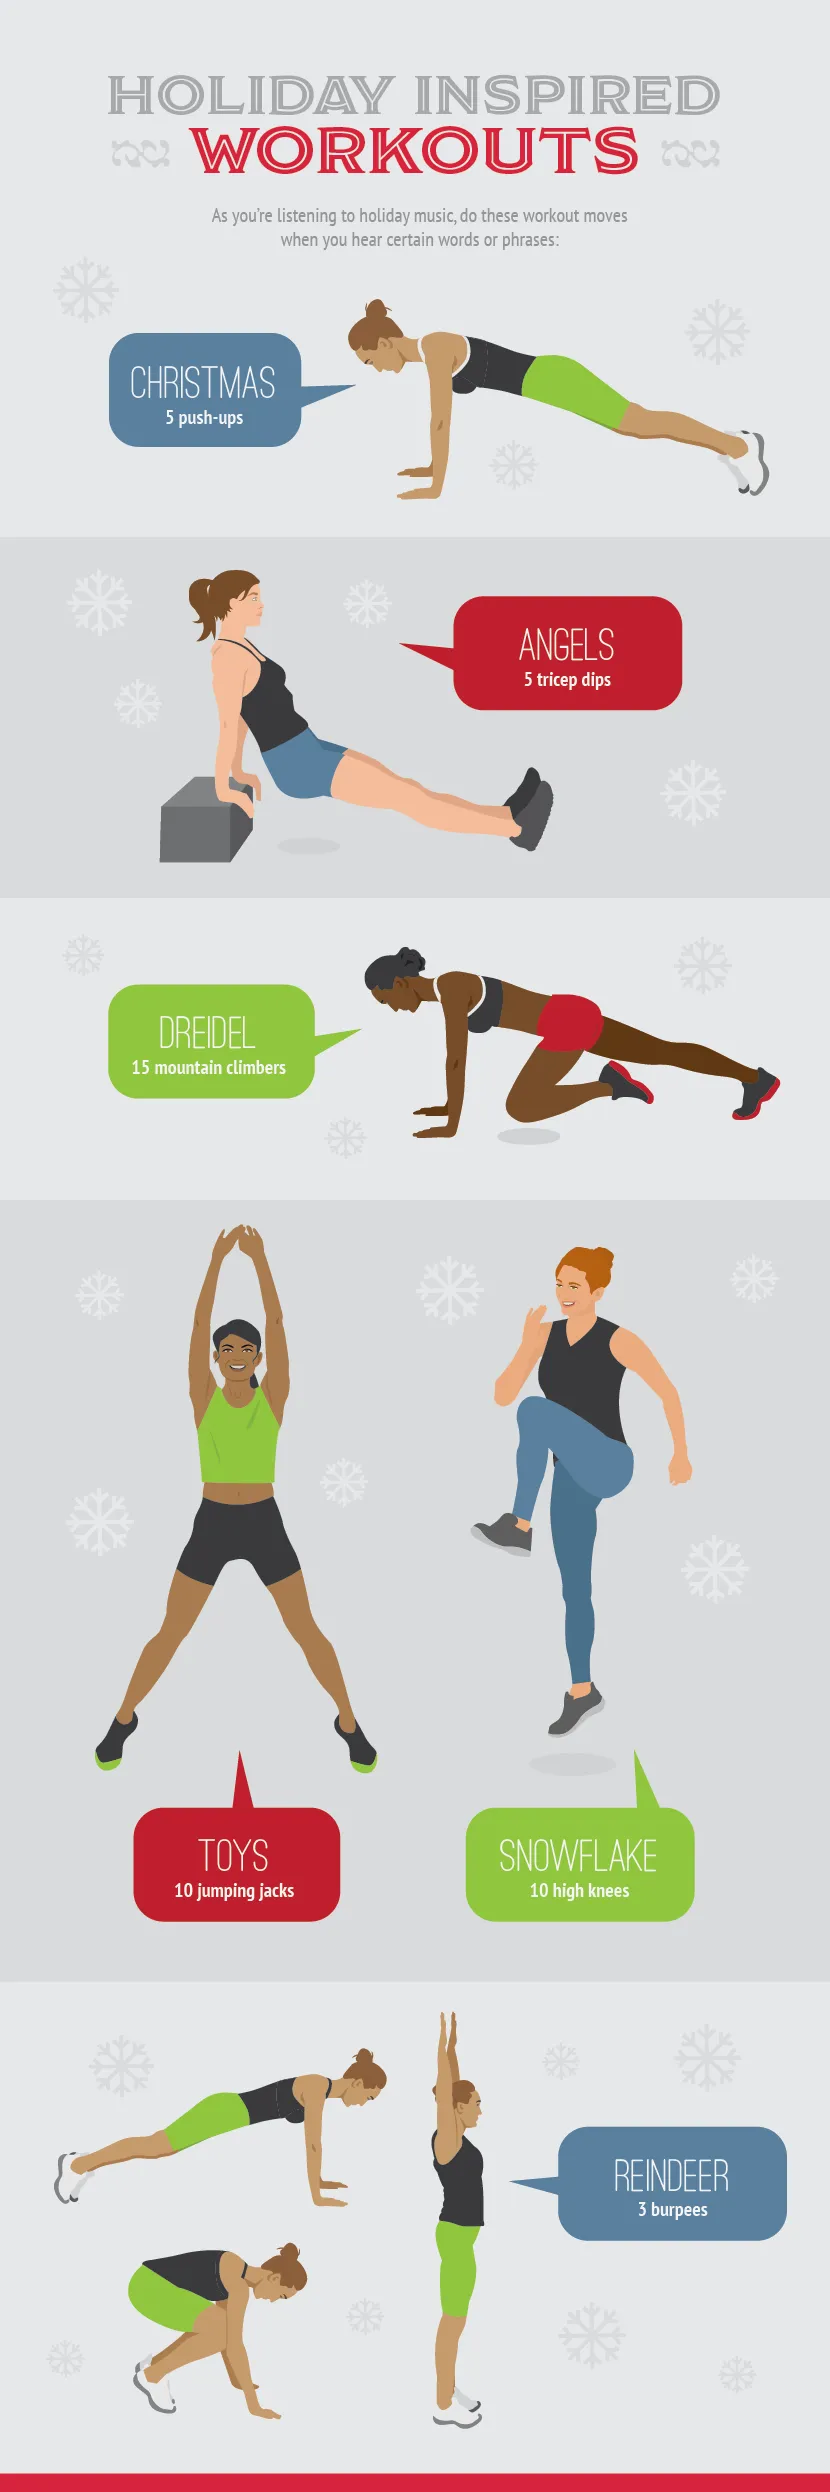 Holiday-Health-Guide-workouts